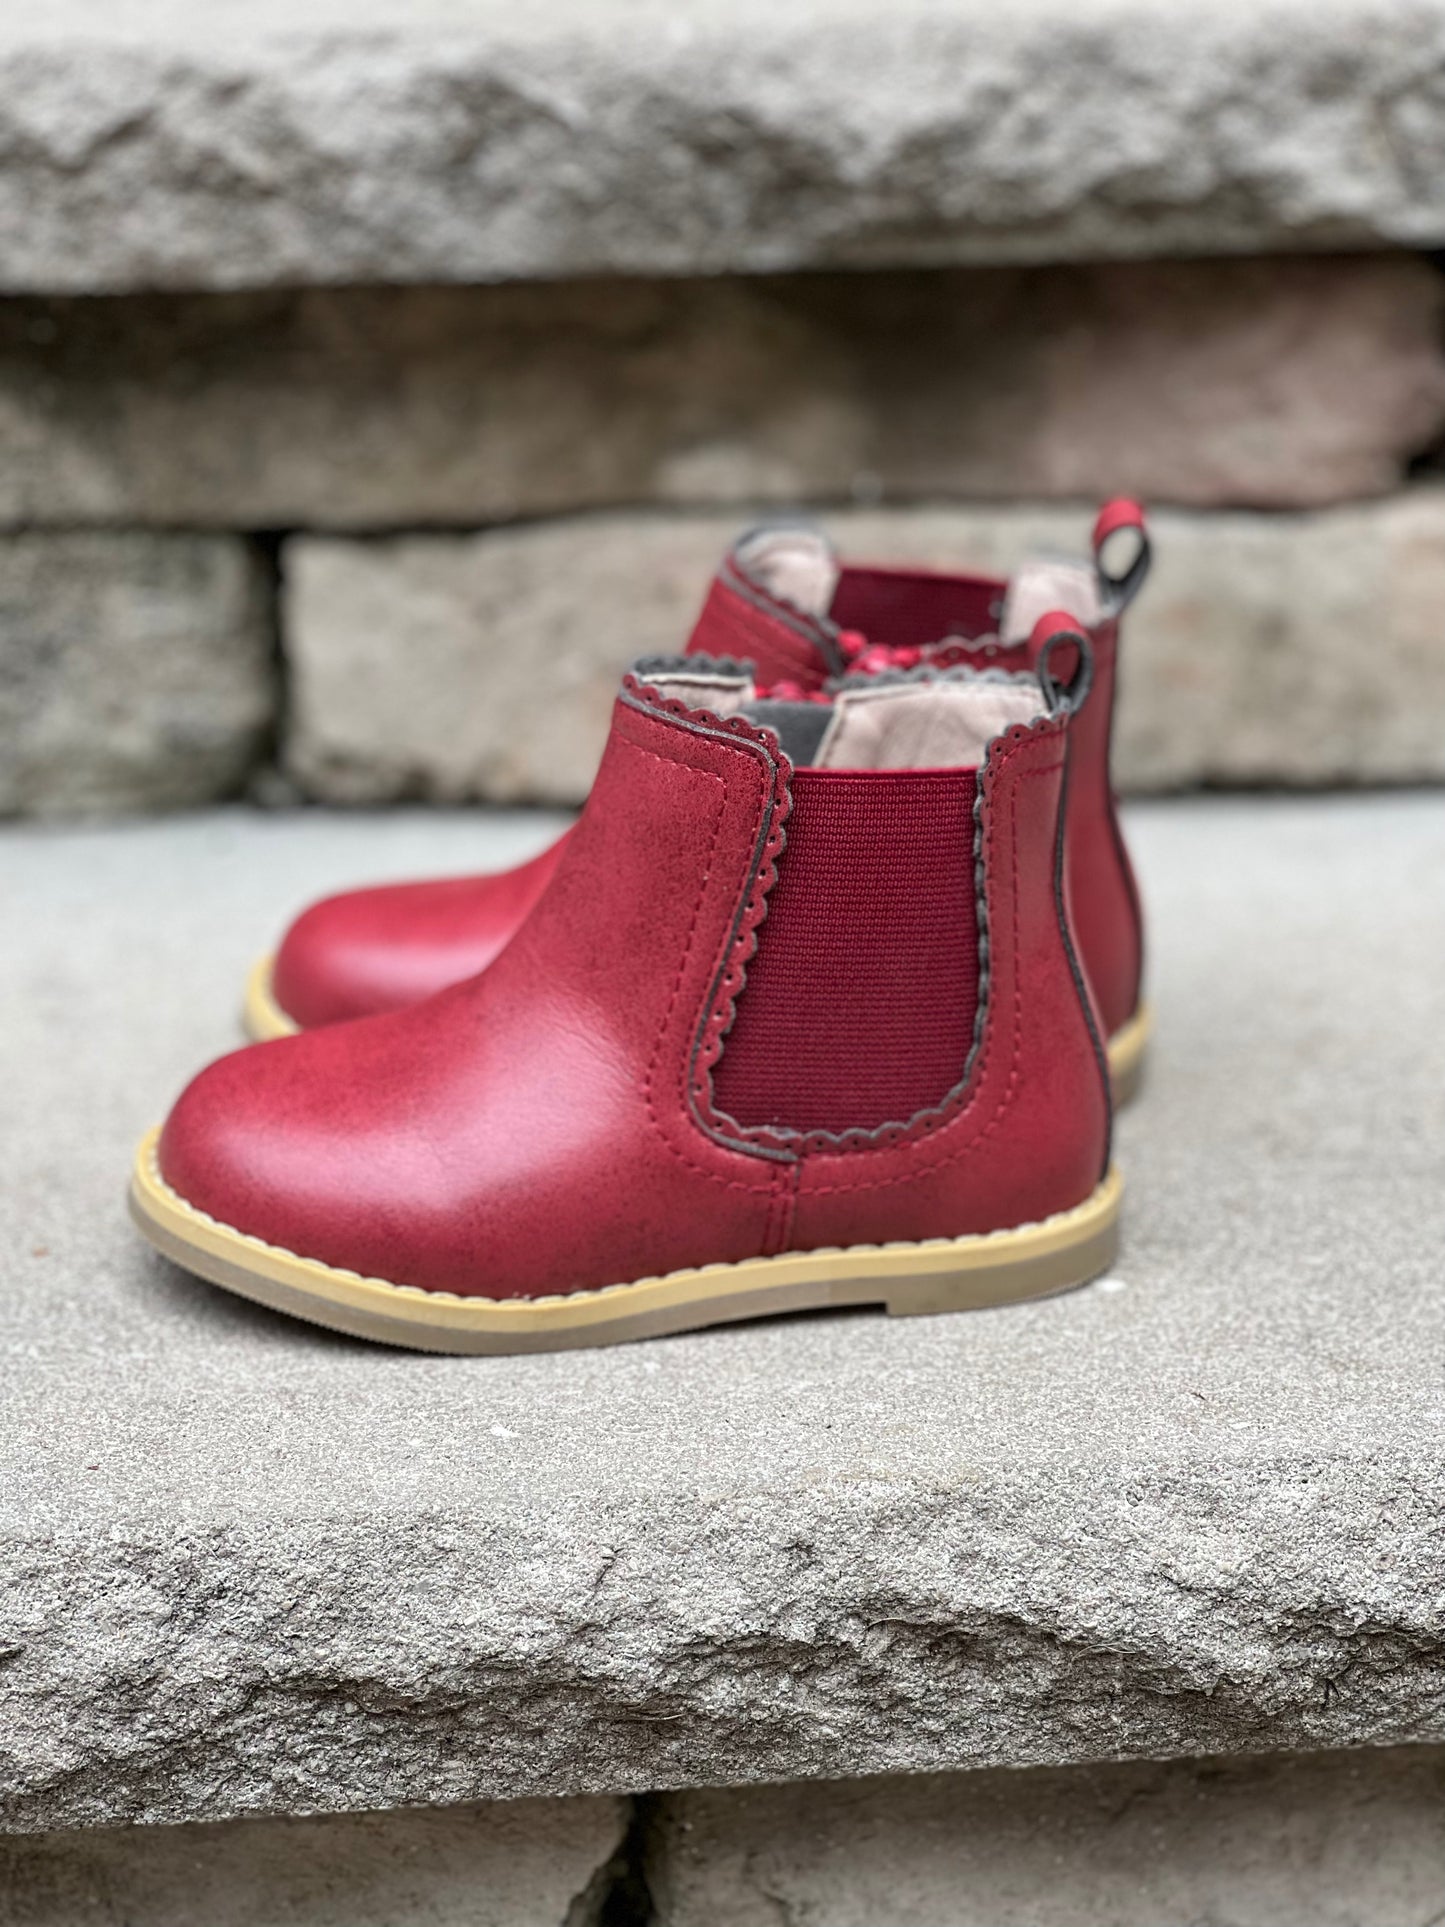 Vintage Chelsea Boot Red with Scallop - Girls